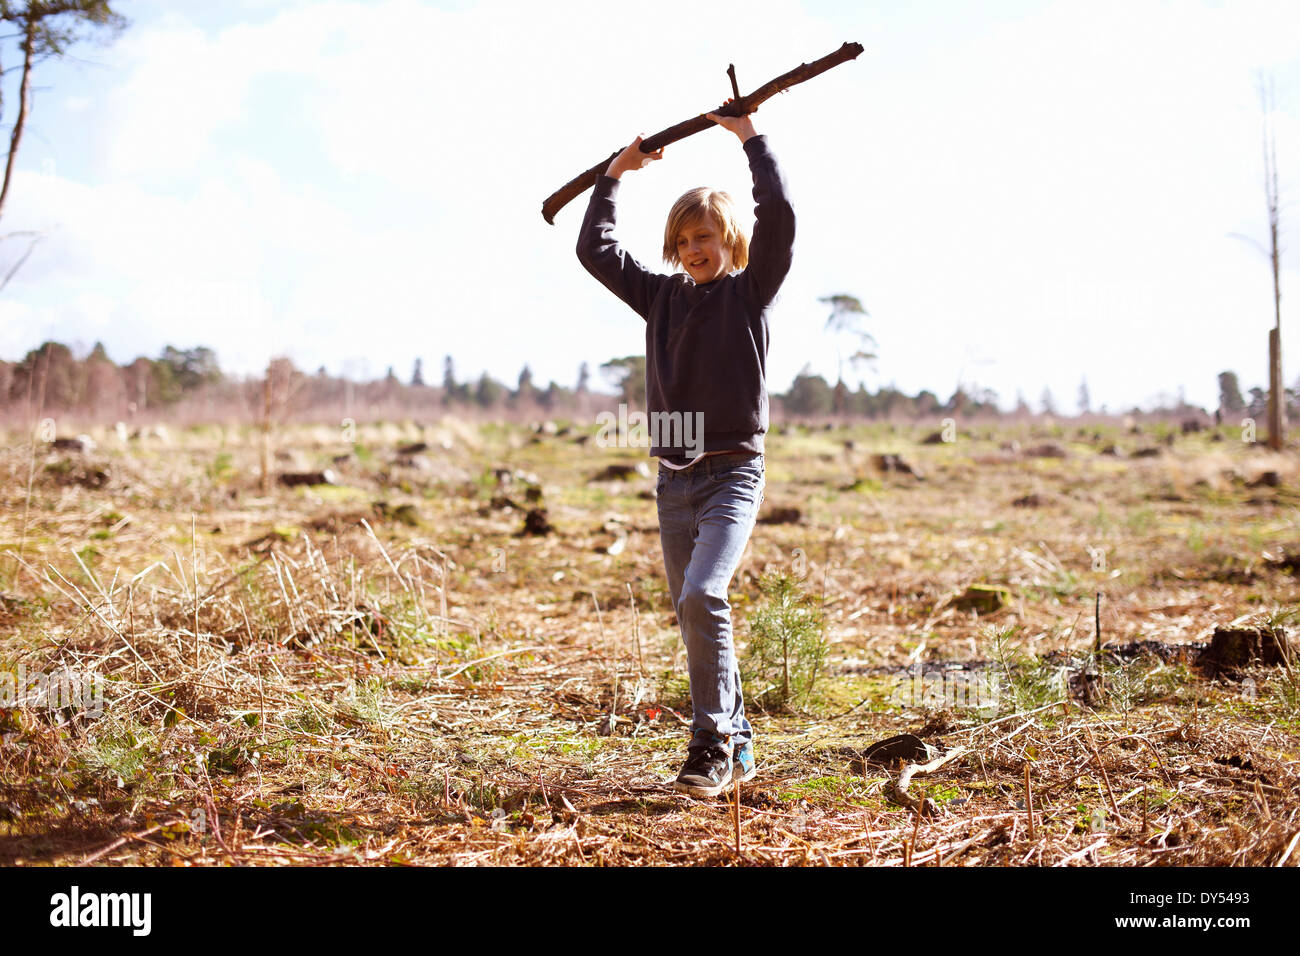 Boy holding up a stick in a plantation clearing Stock Photo